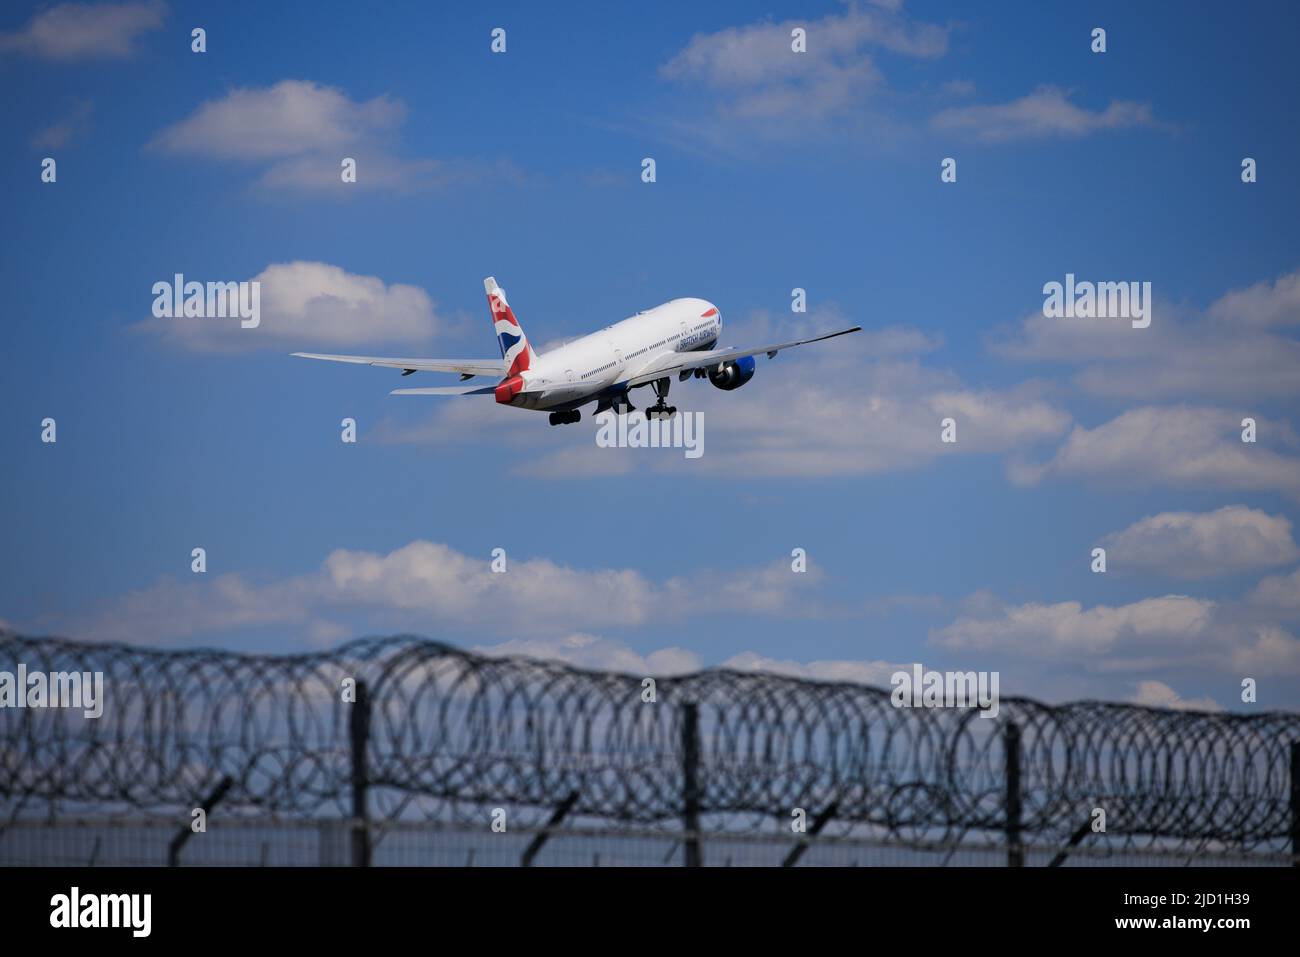 Security fence at Gatwick Airport as a British Airways plane takes off on the runway Stock Photo